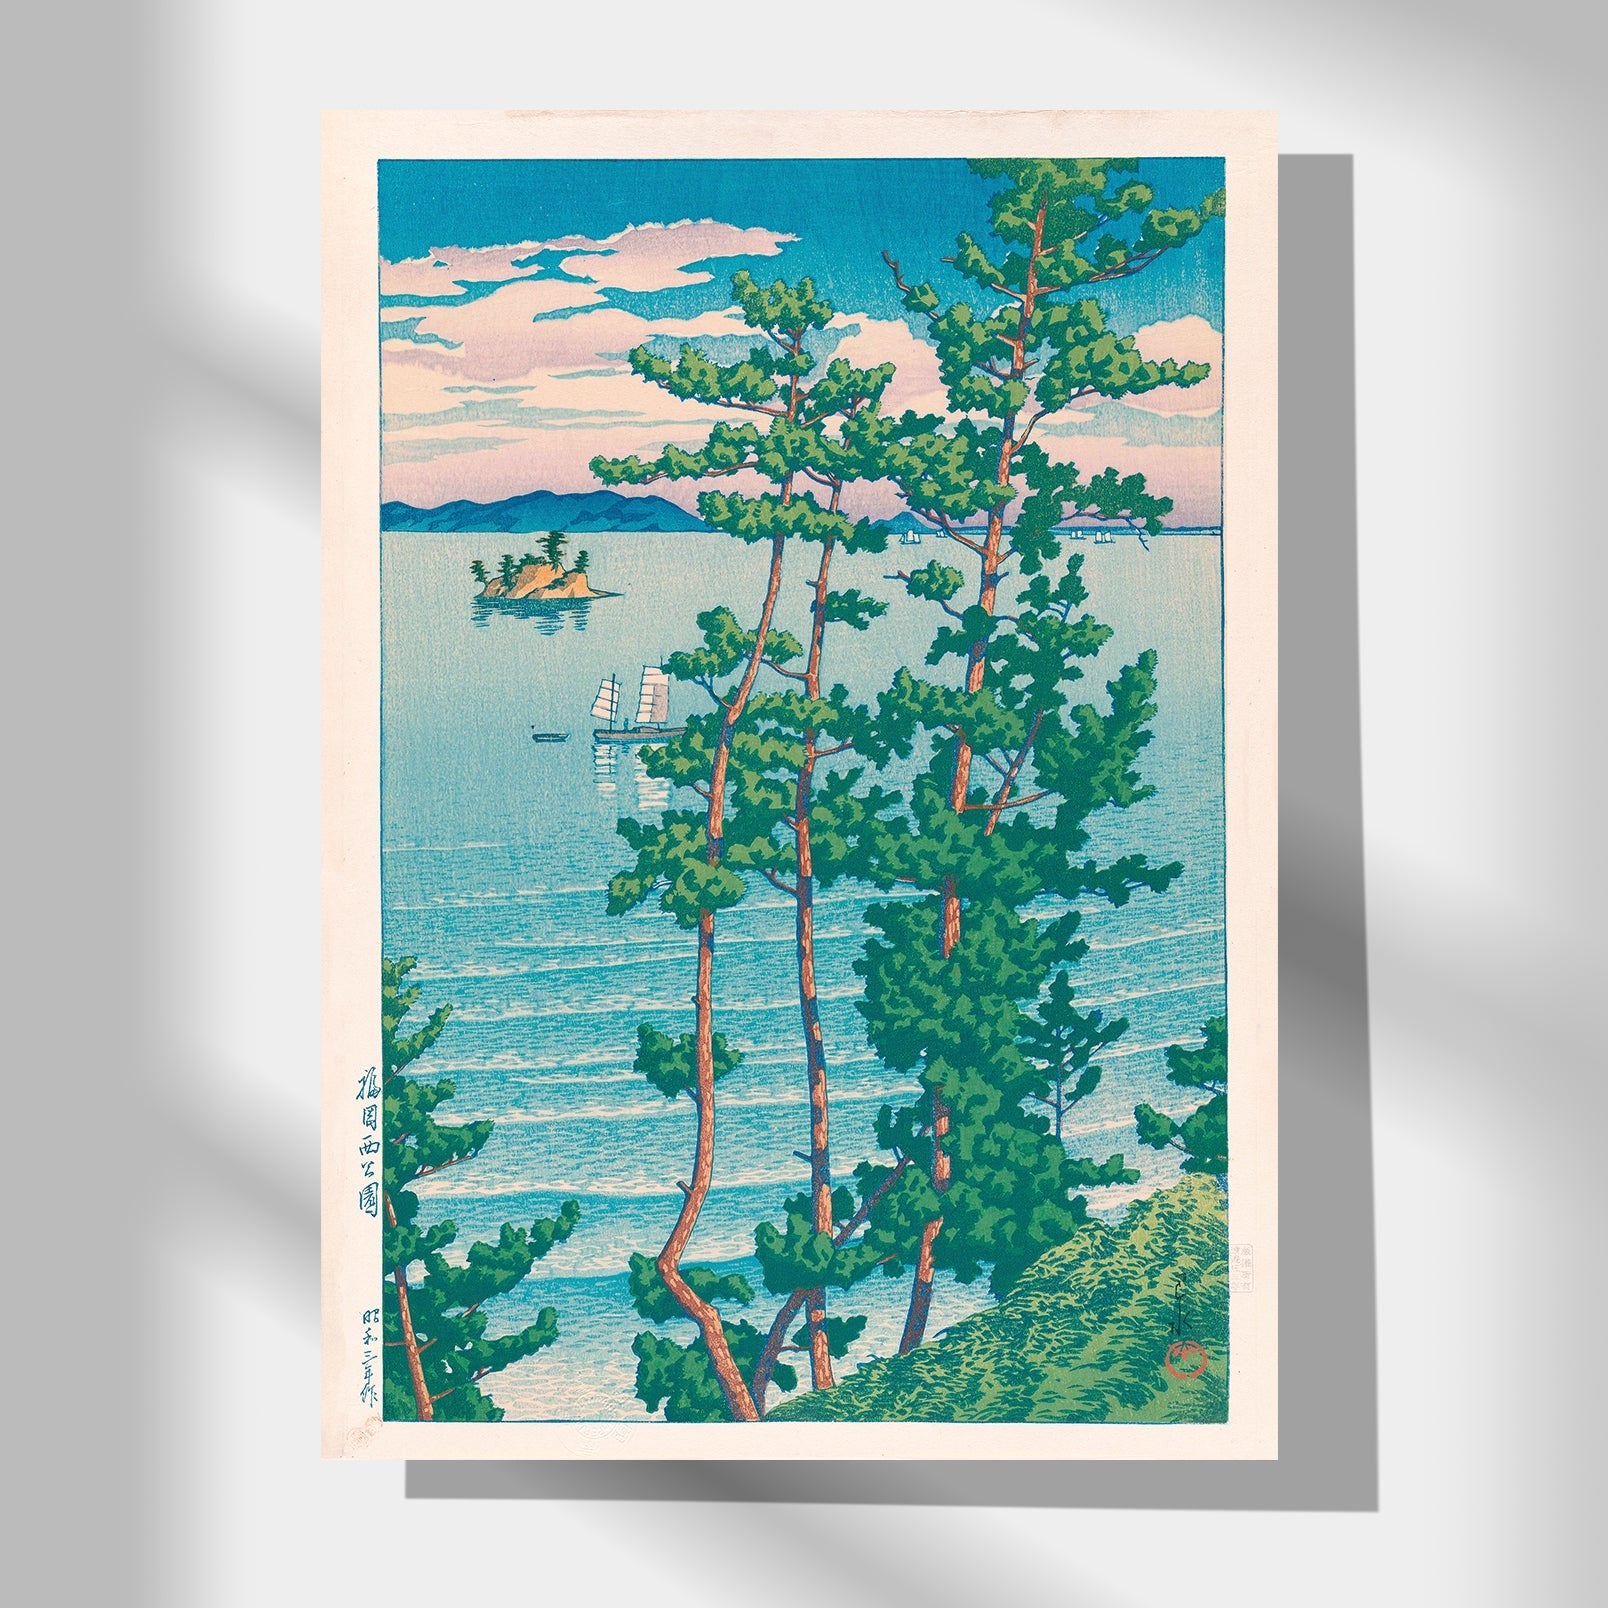  Japanese art poster by Hasui Kawase depicting a boat on the water, pine trees, and white waves lapping on the beach.